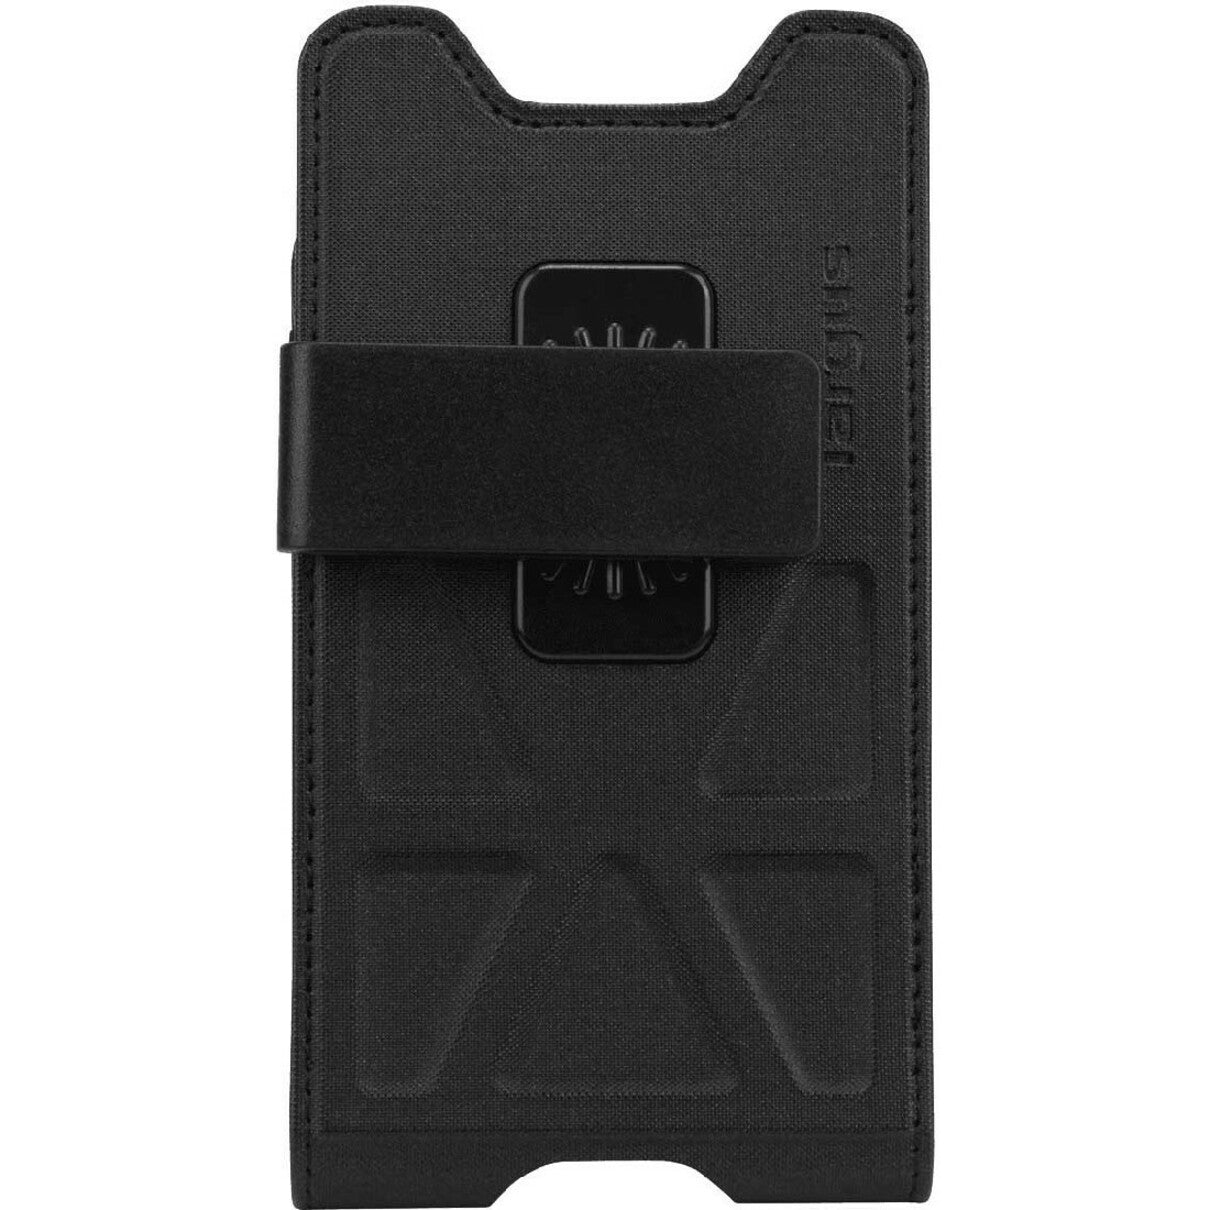 Targus TFD151GLZ Field-Ready Universal Holster for 4.7" Smartphones, Belt Clip, Bump and Scratch Resistant, Black